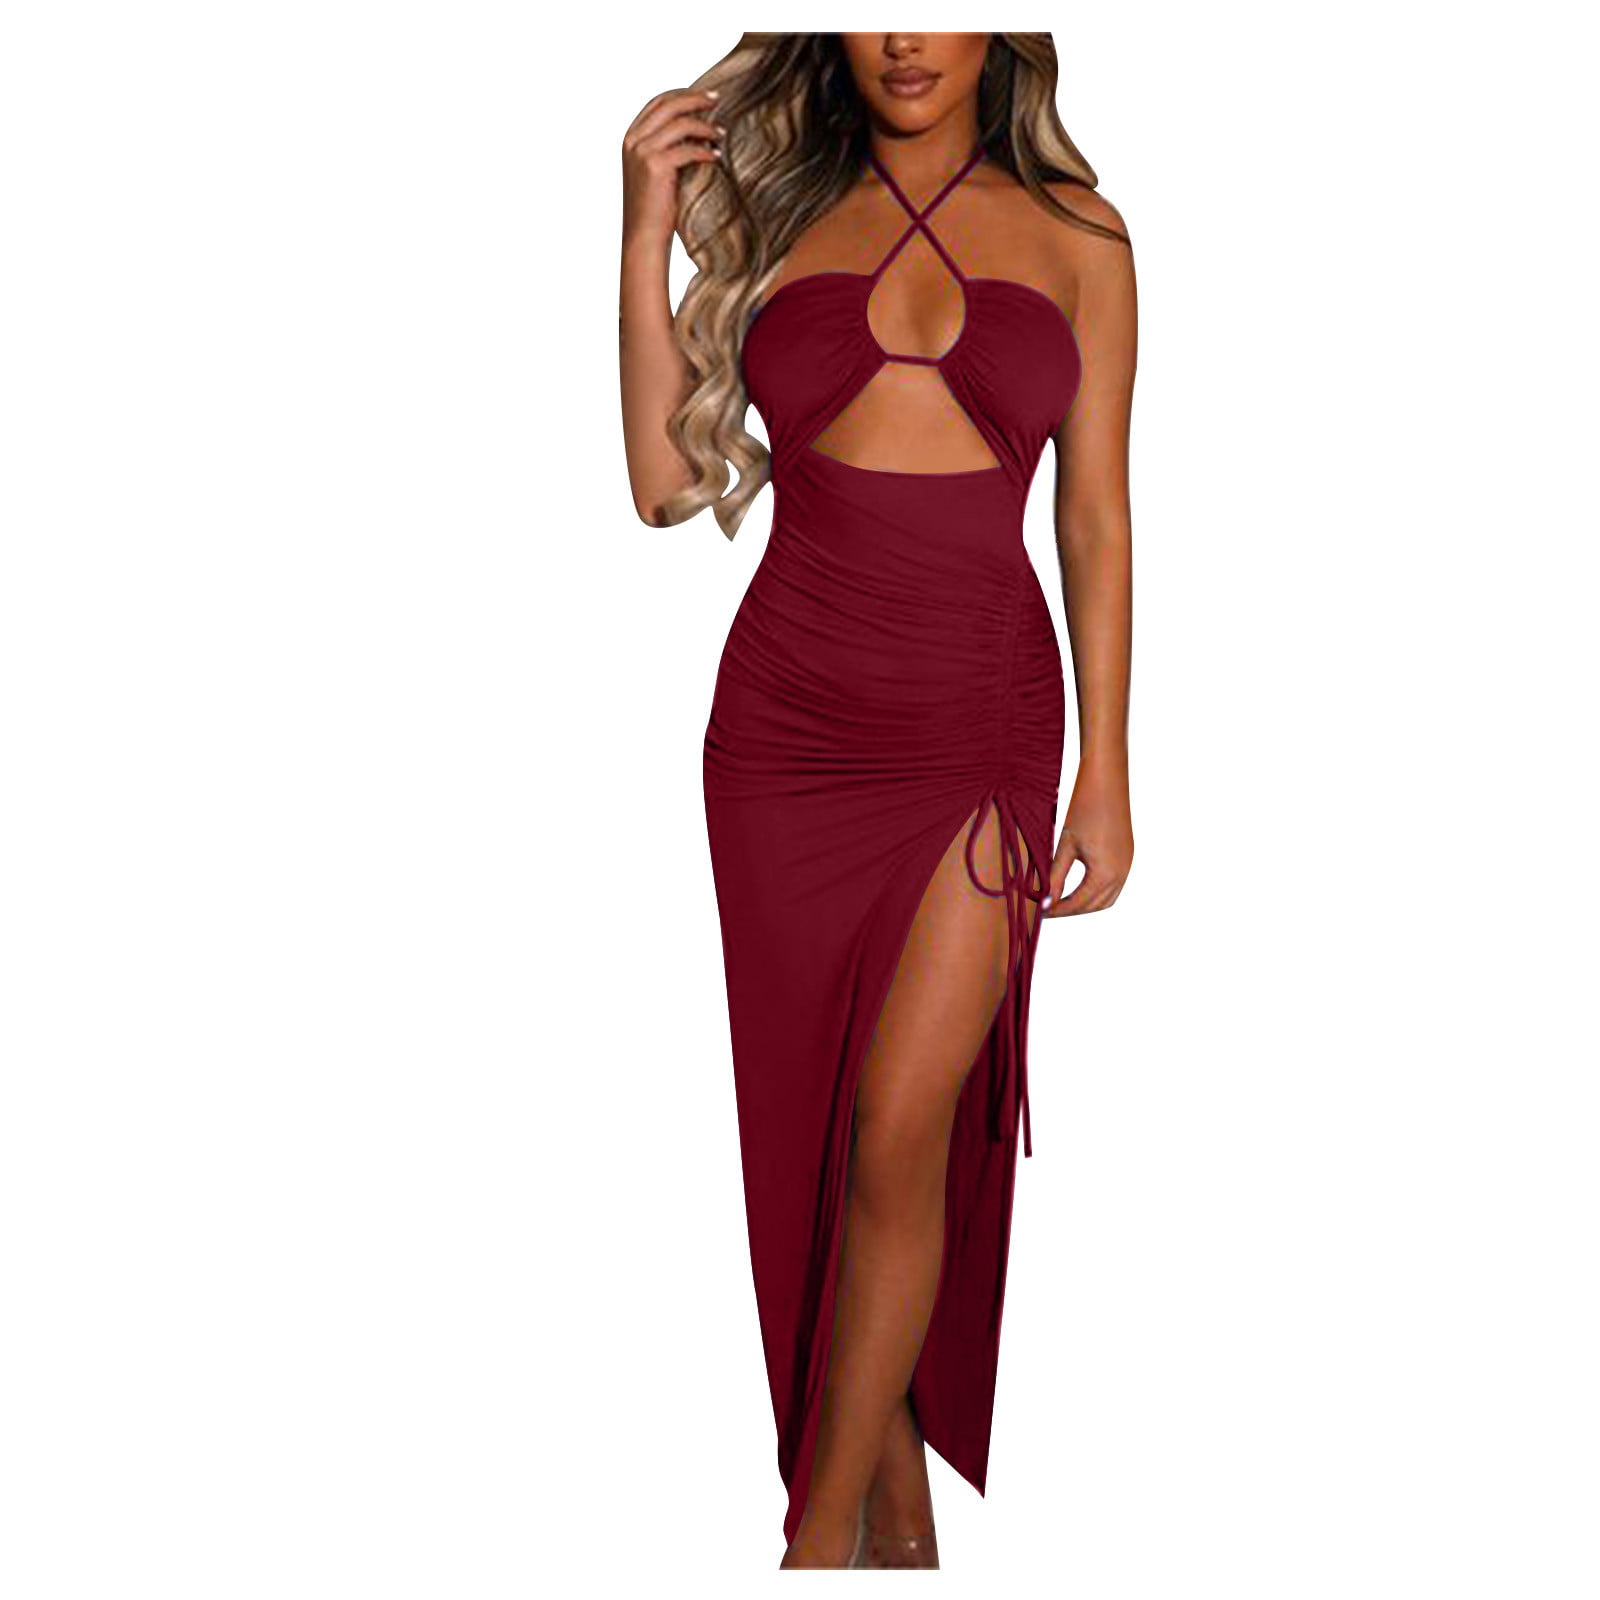 Wycnly Formal Dresses for Women Party Club Sexy Cut-out Slit